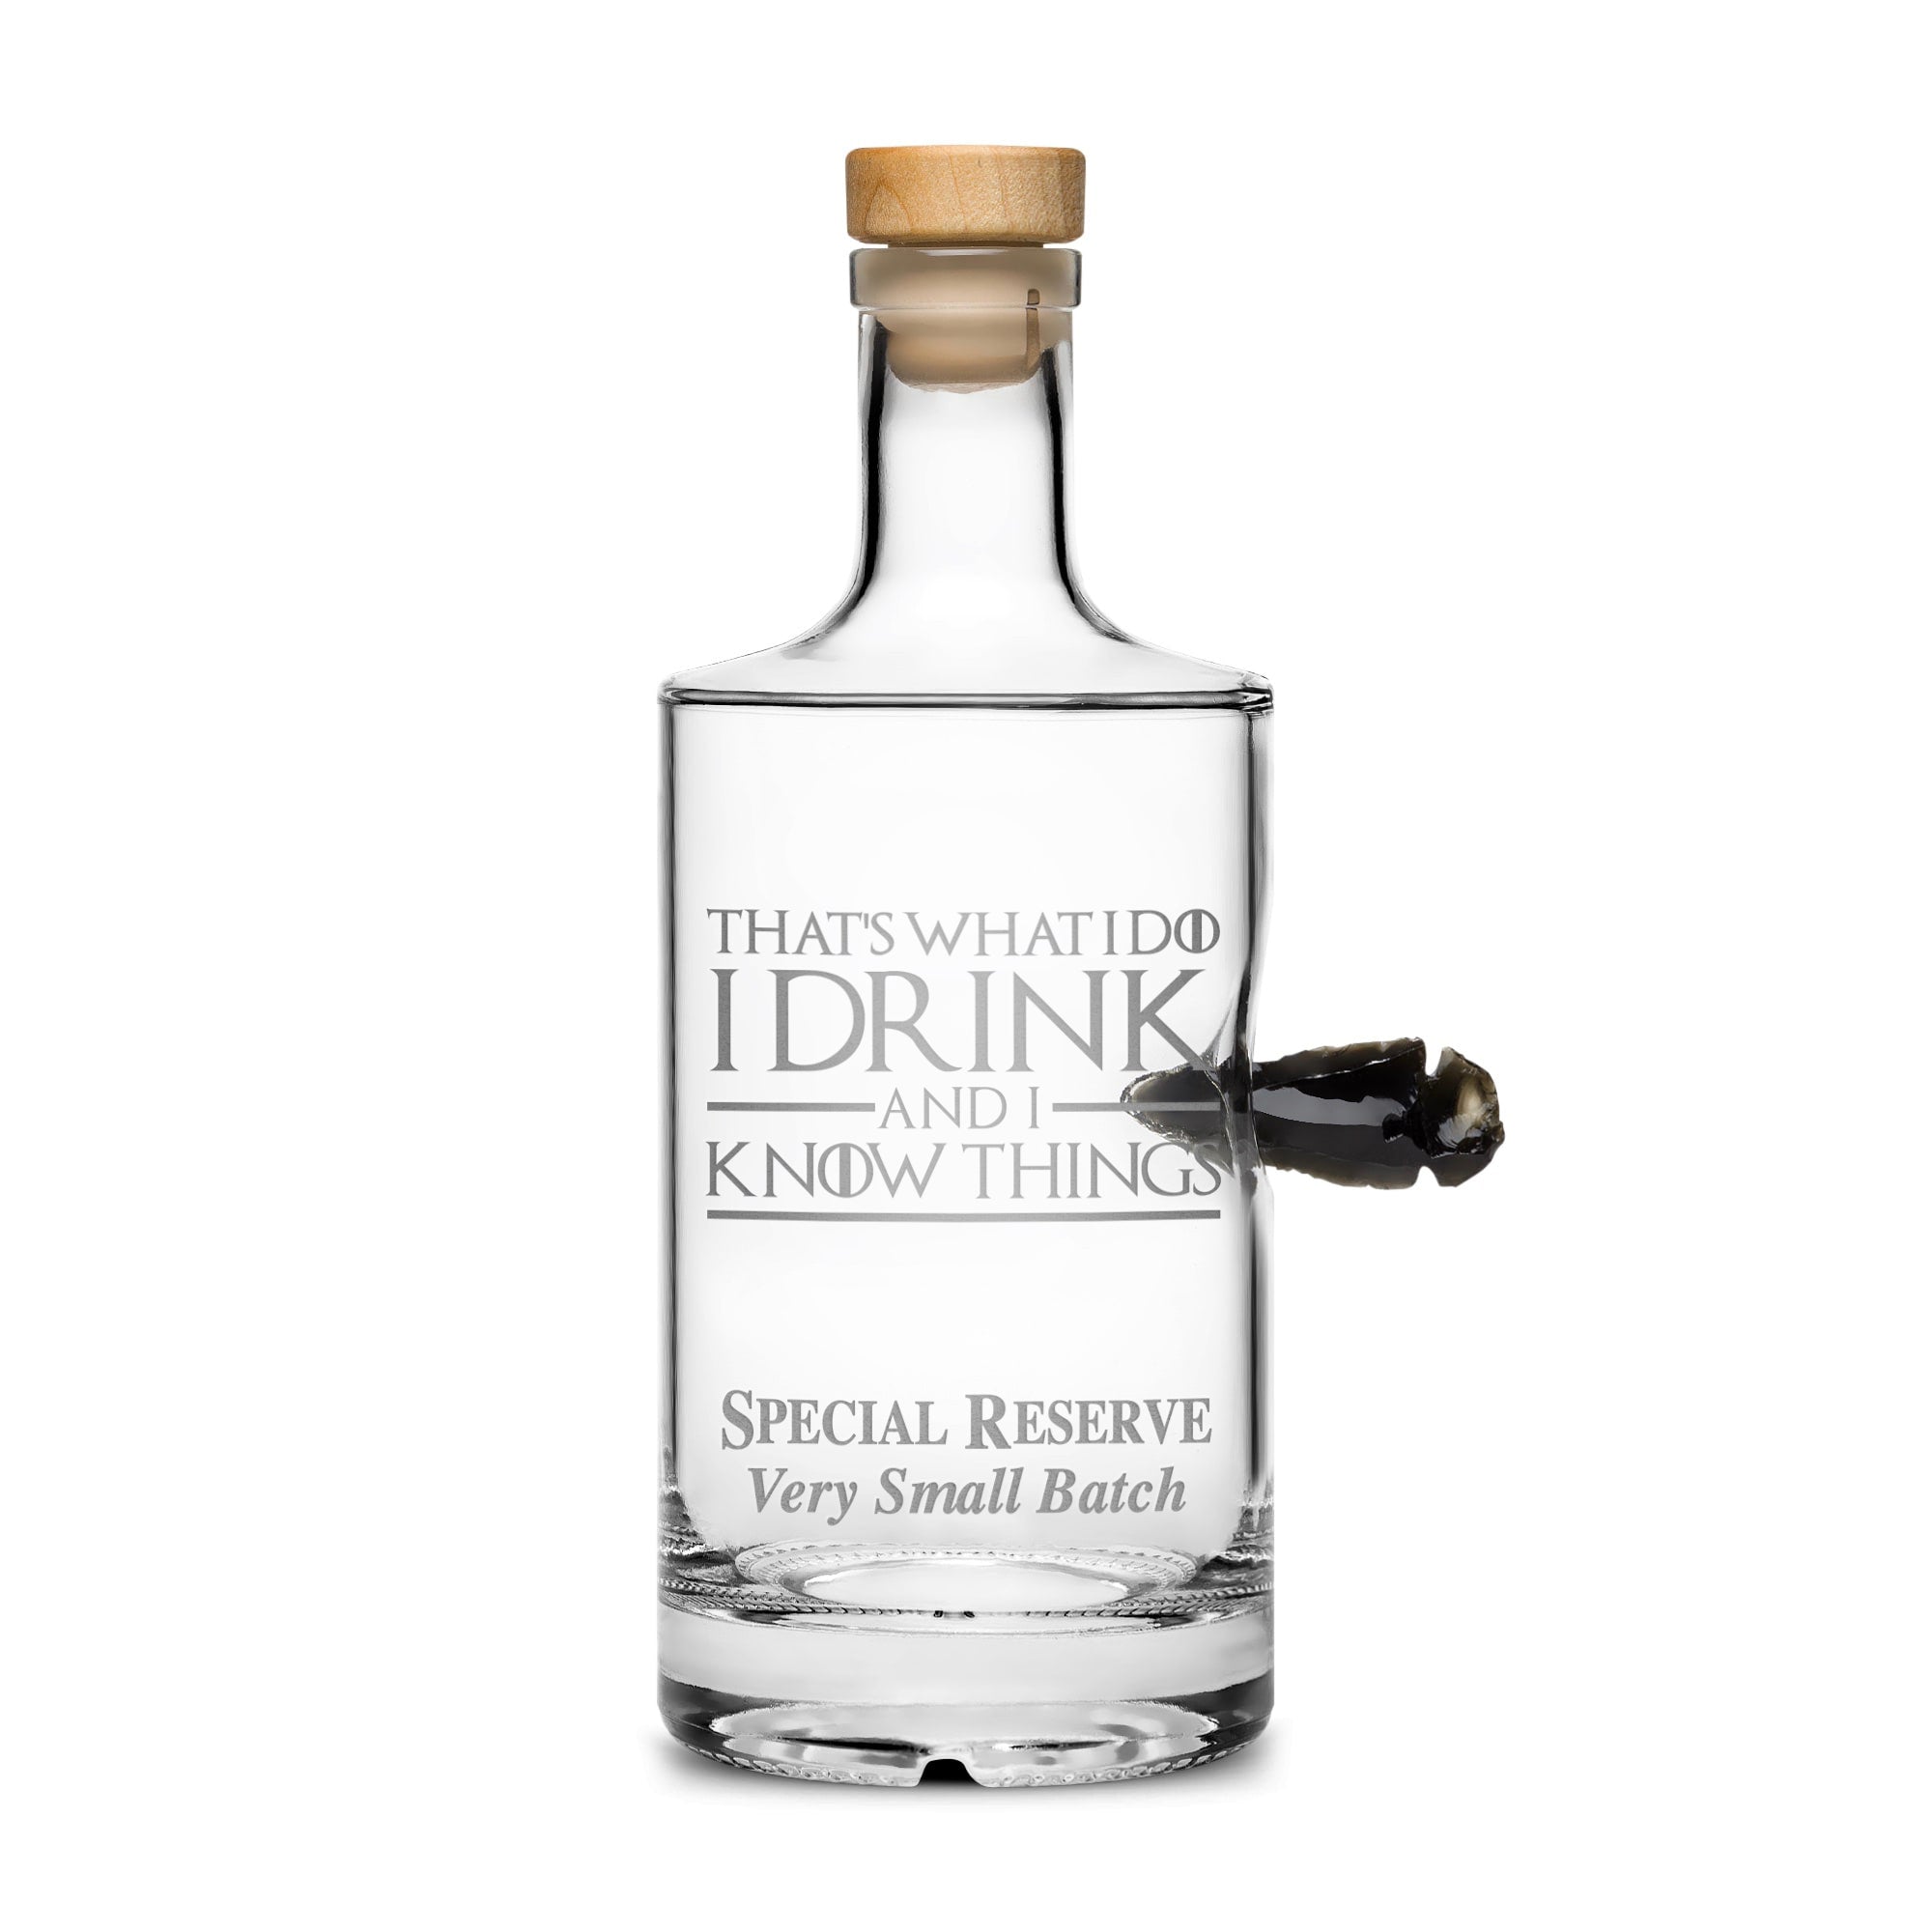 Premium Refillable Jersey Bottle, Game of Thrones, Obsidian Dragon Glass Arrowhead, I Drink and I Know Things, 750mL, Laser Etched or Hand Etched